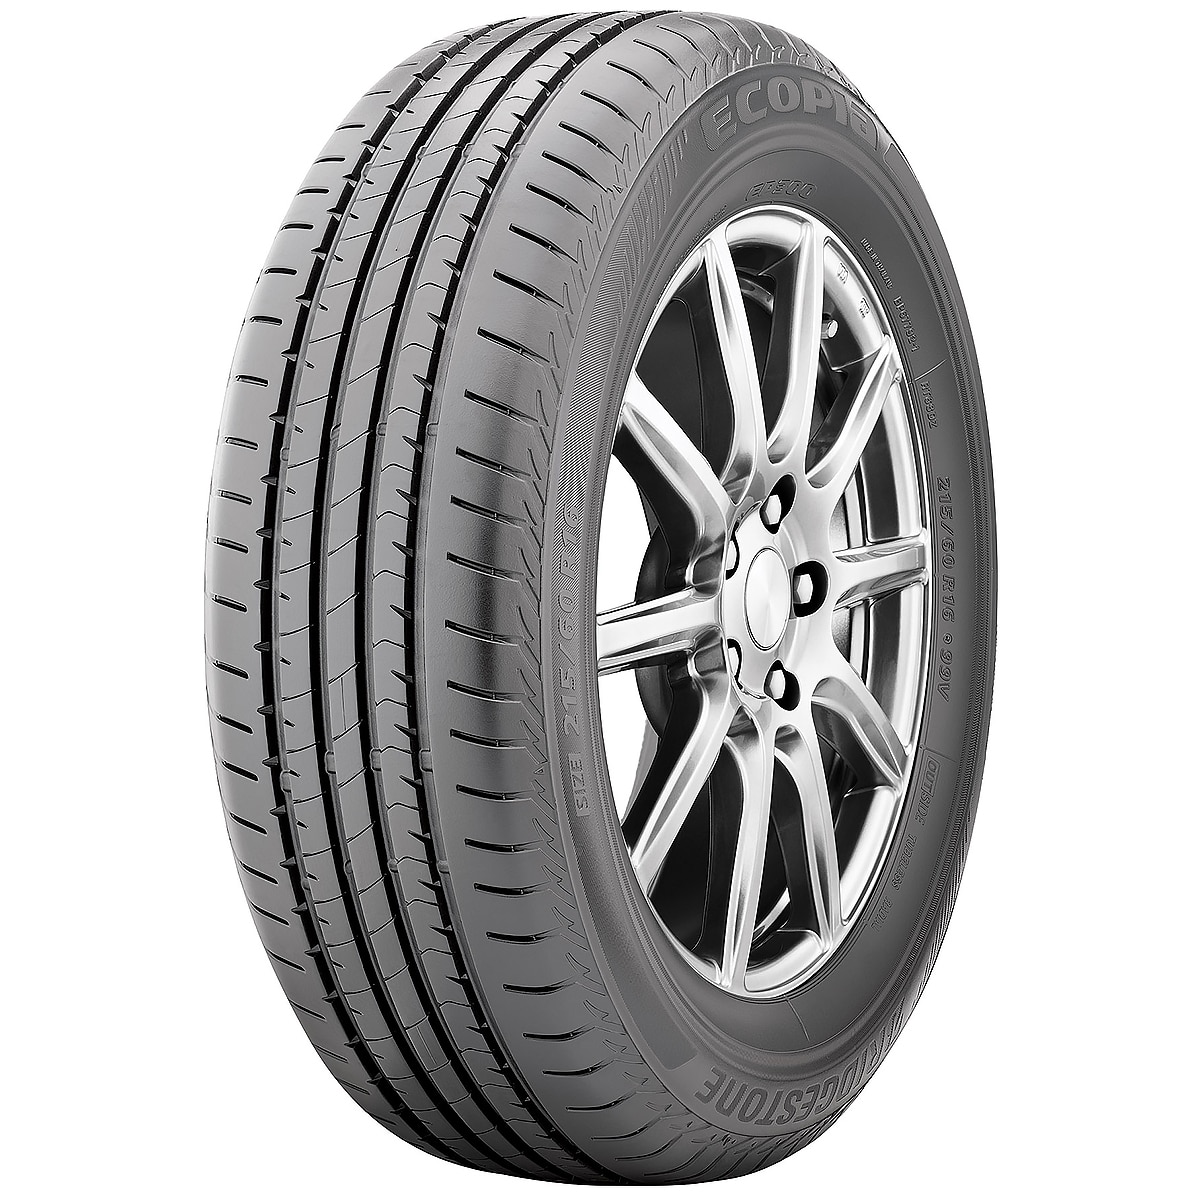 205/65R15 94V BS EP300 - tyre